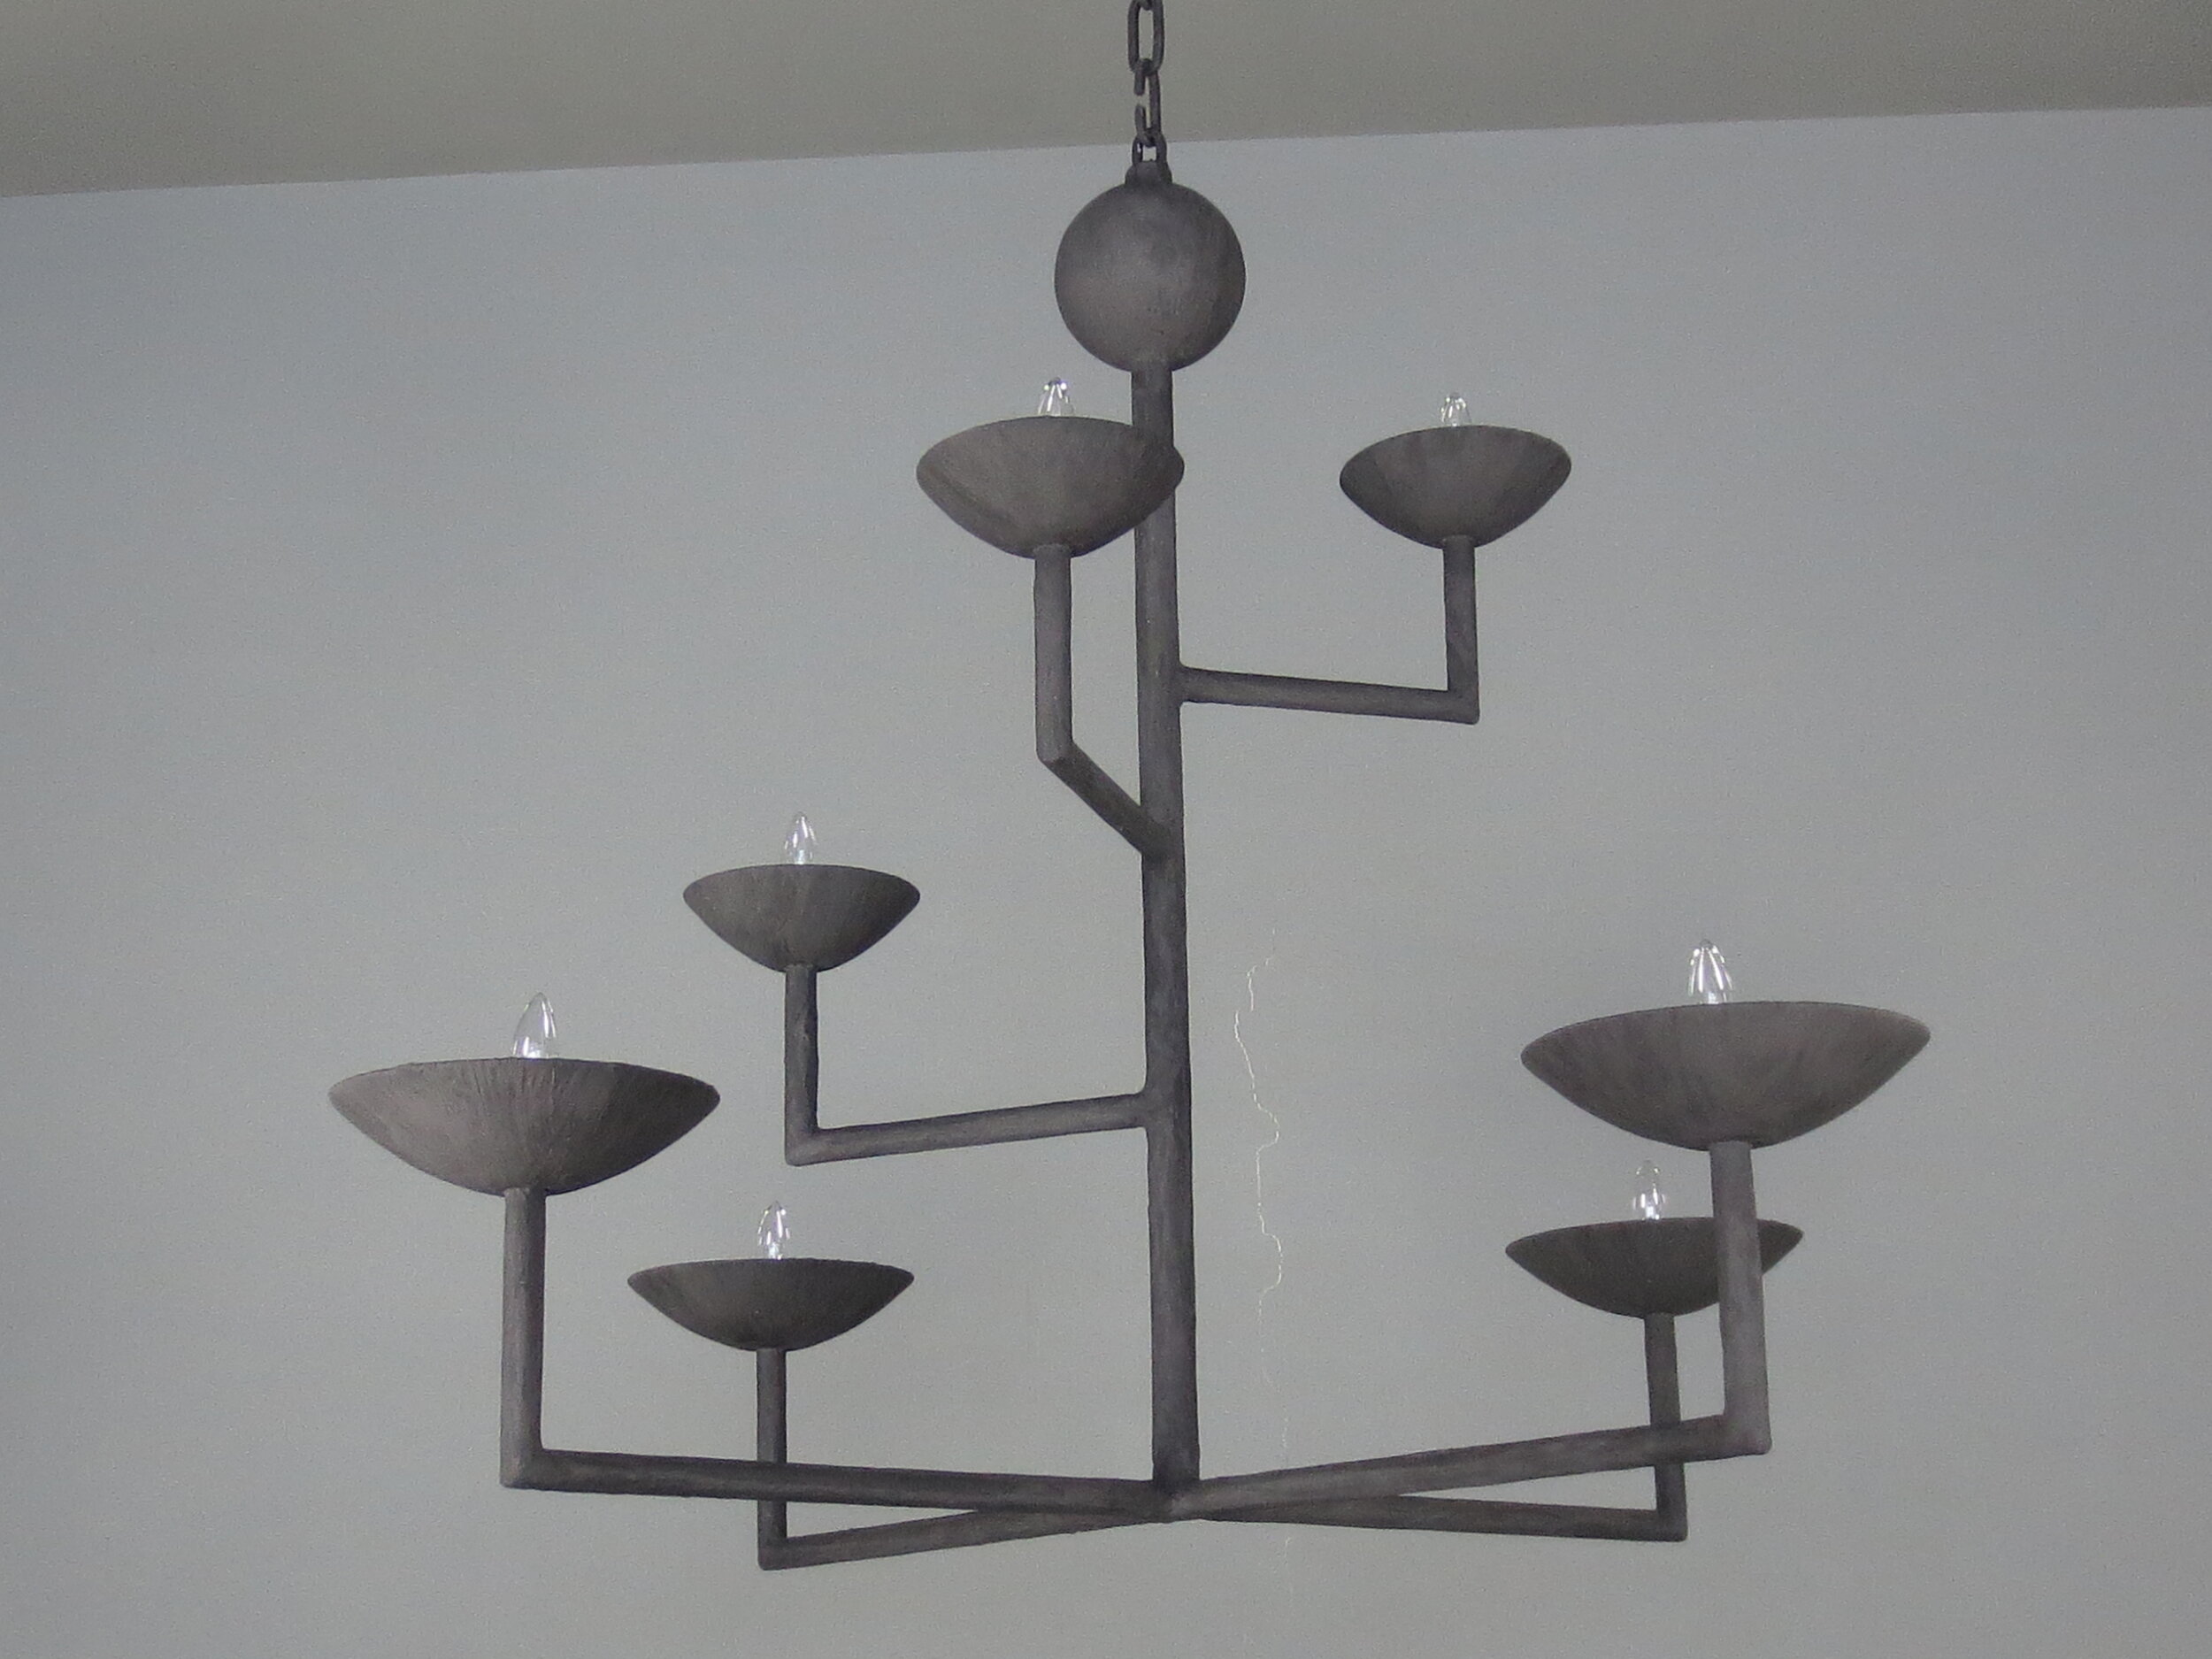 7 Cup Rectangular Chandelier with Black Finish